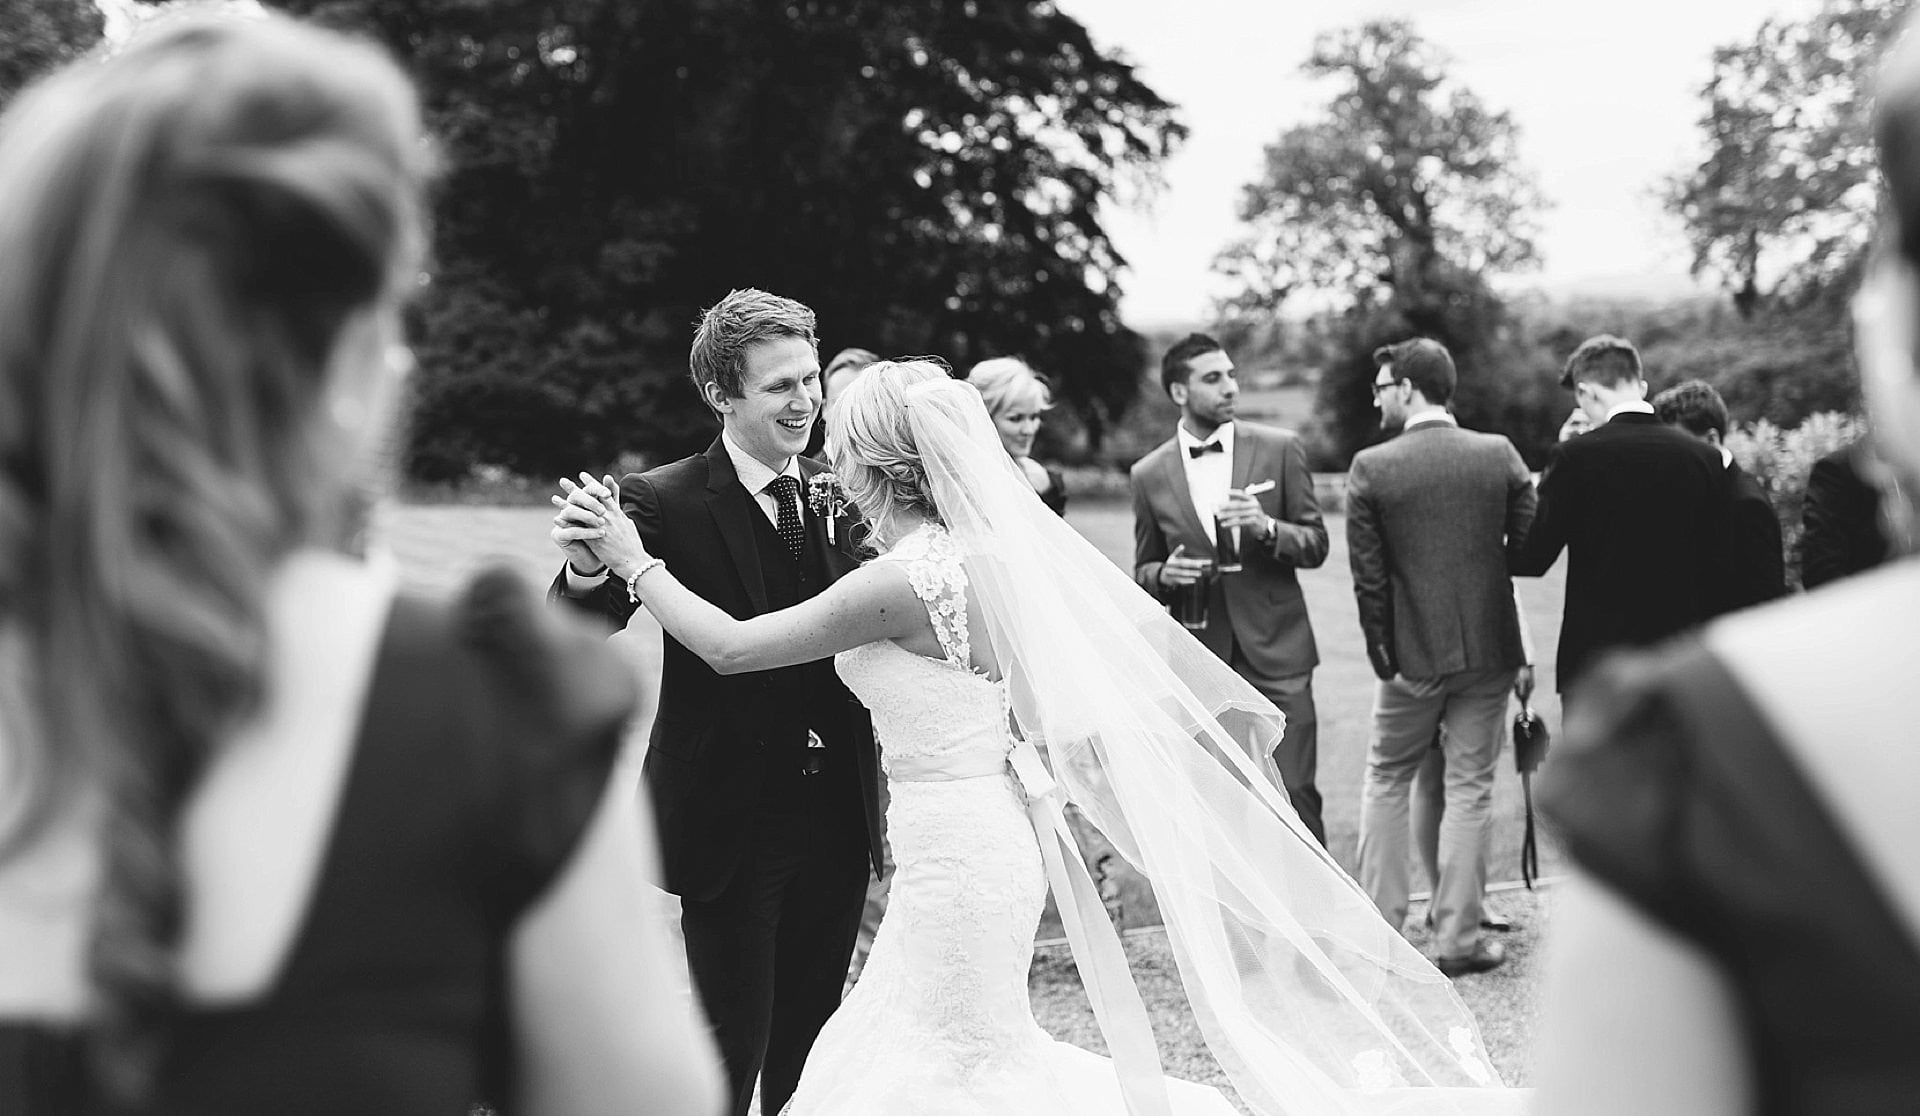 A black and white photo of a bride and groom dancing.